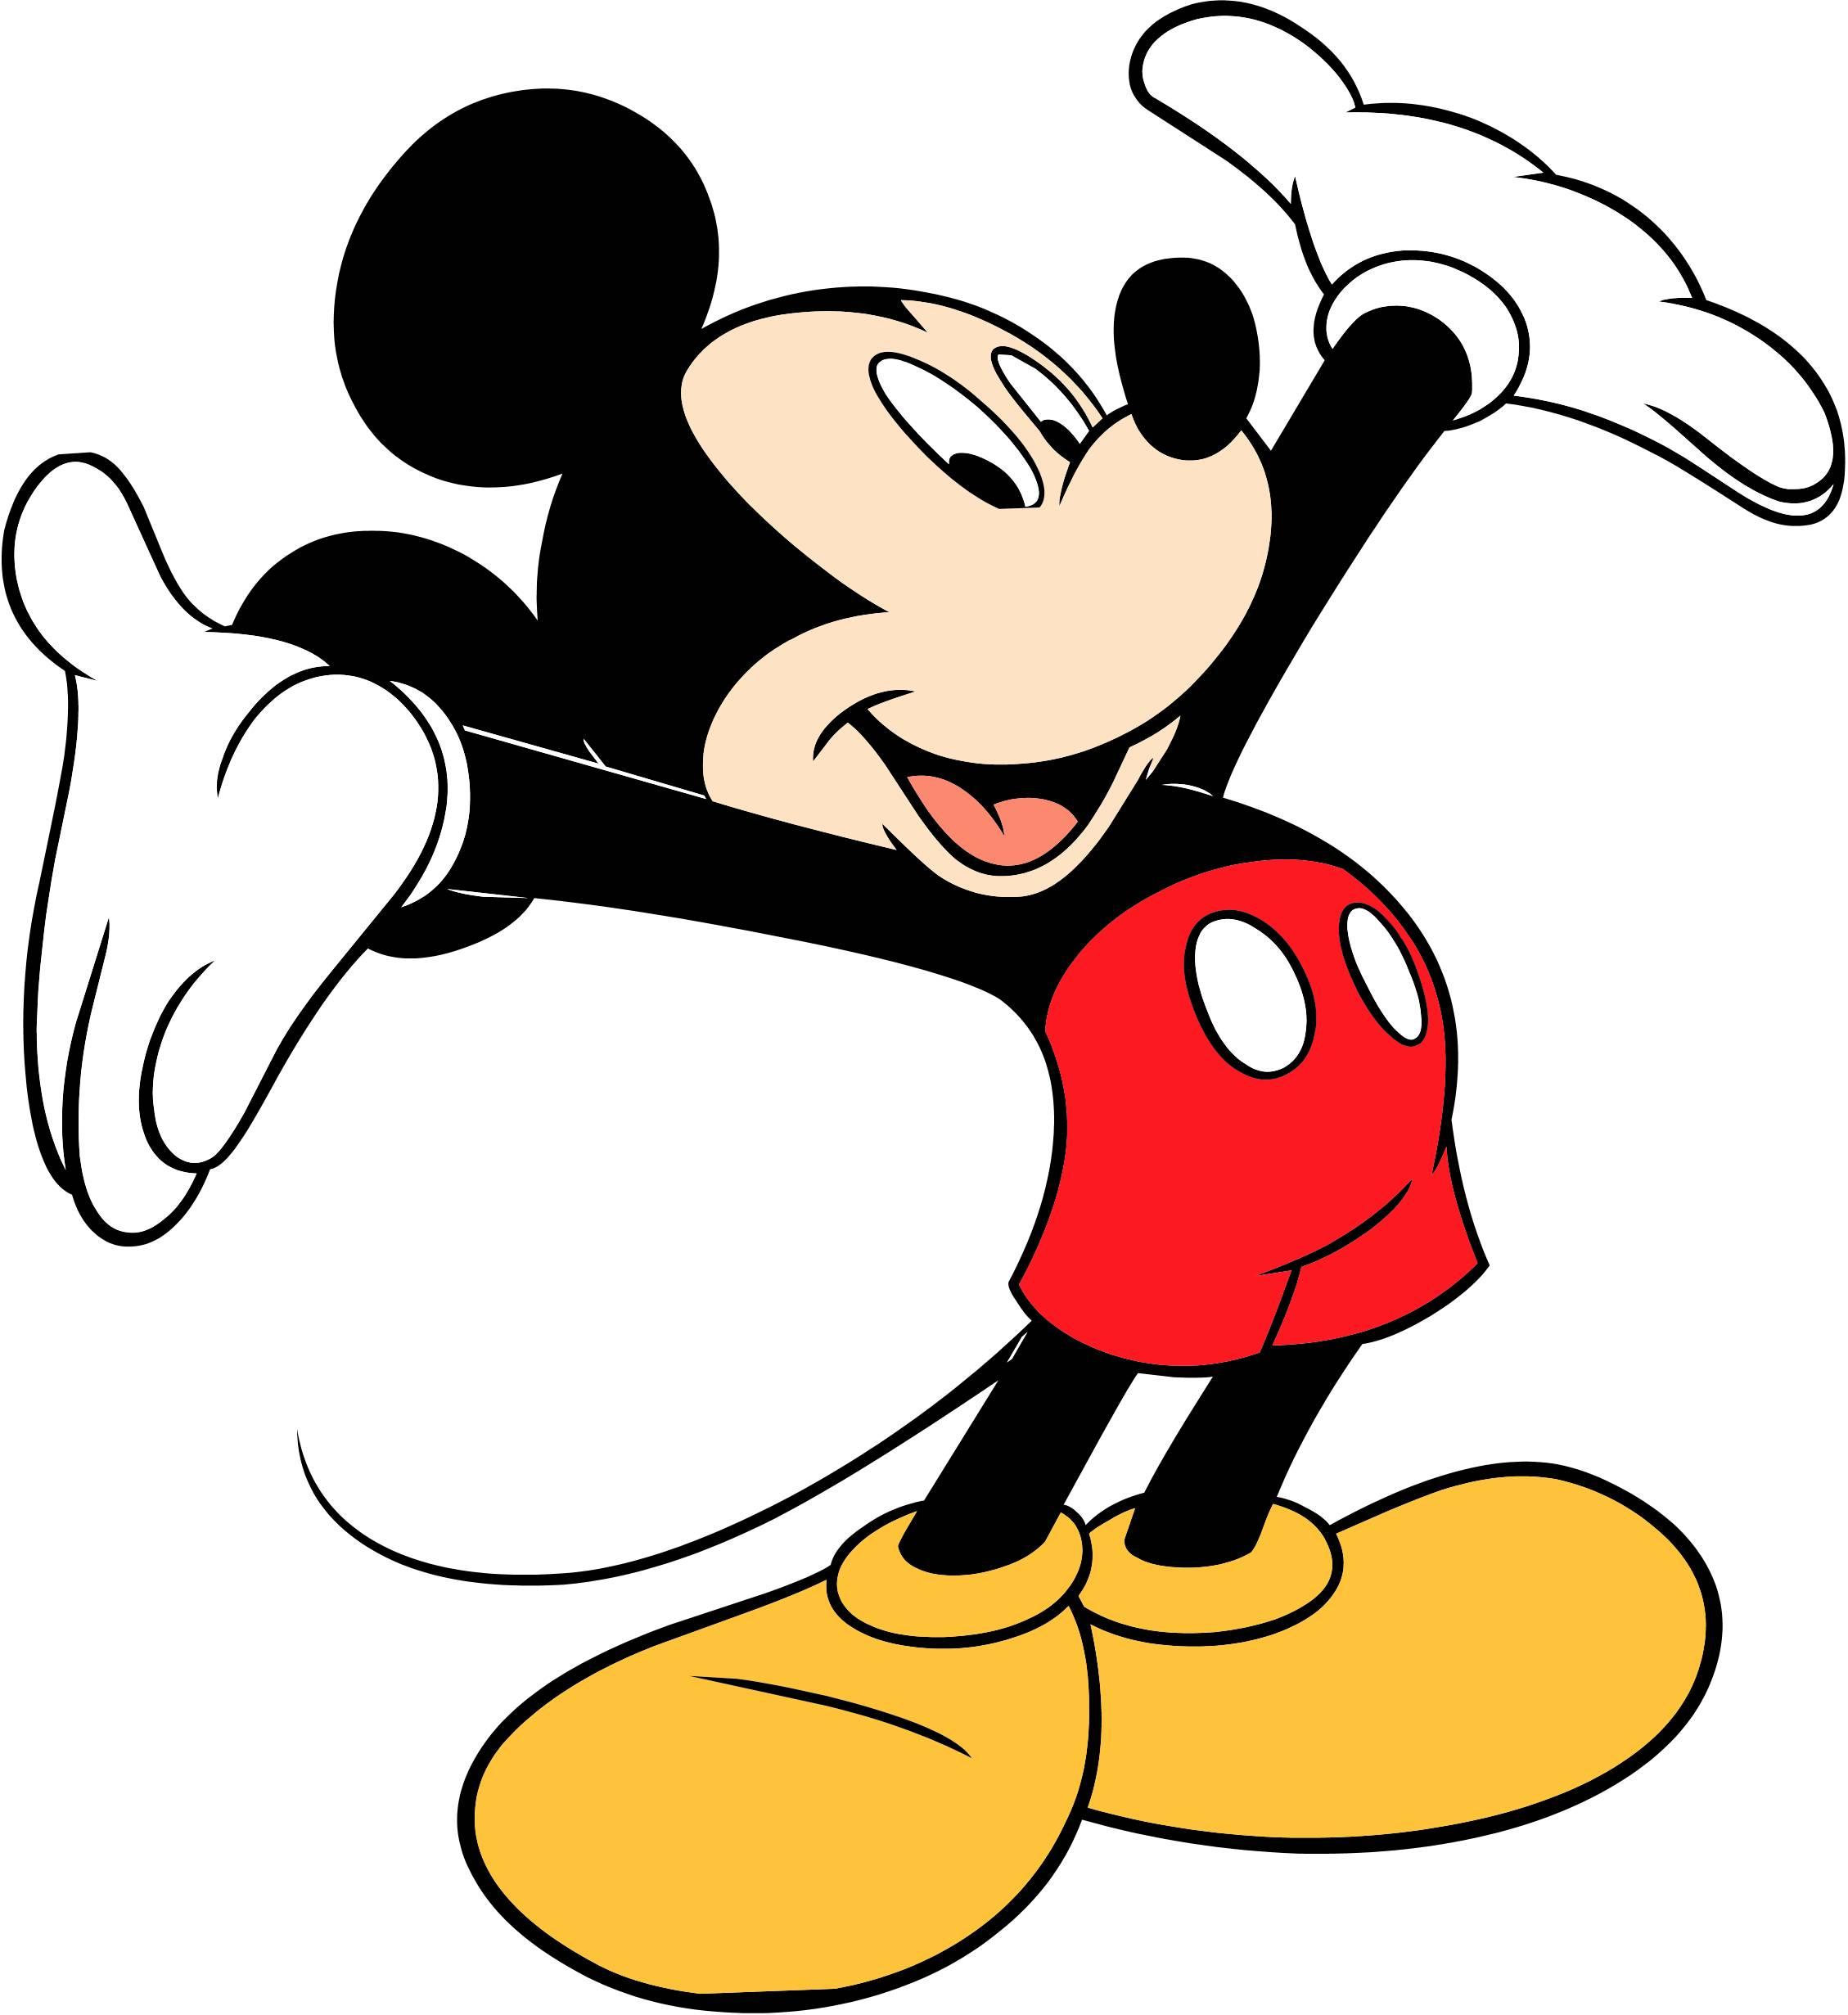 Mickey mouse cartoon image free download clip art jpg 2